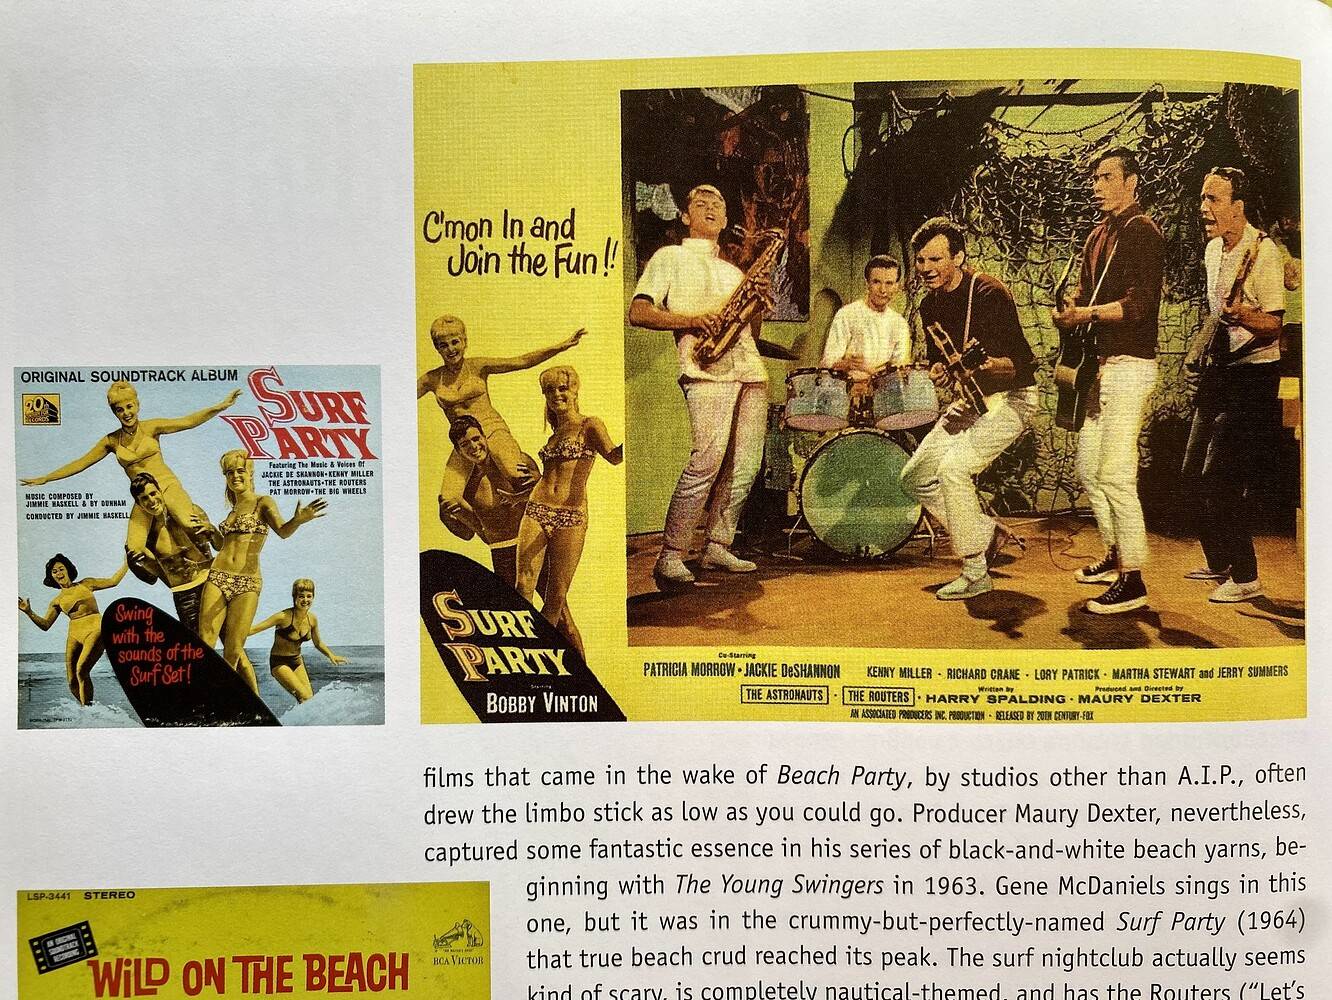 Surf movie advertisements including Surf Party.